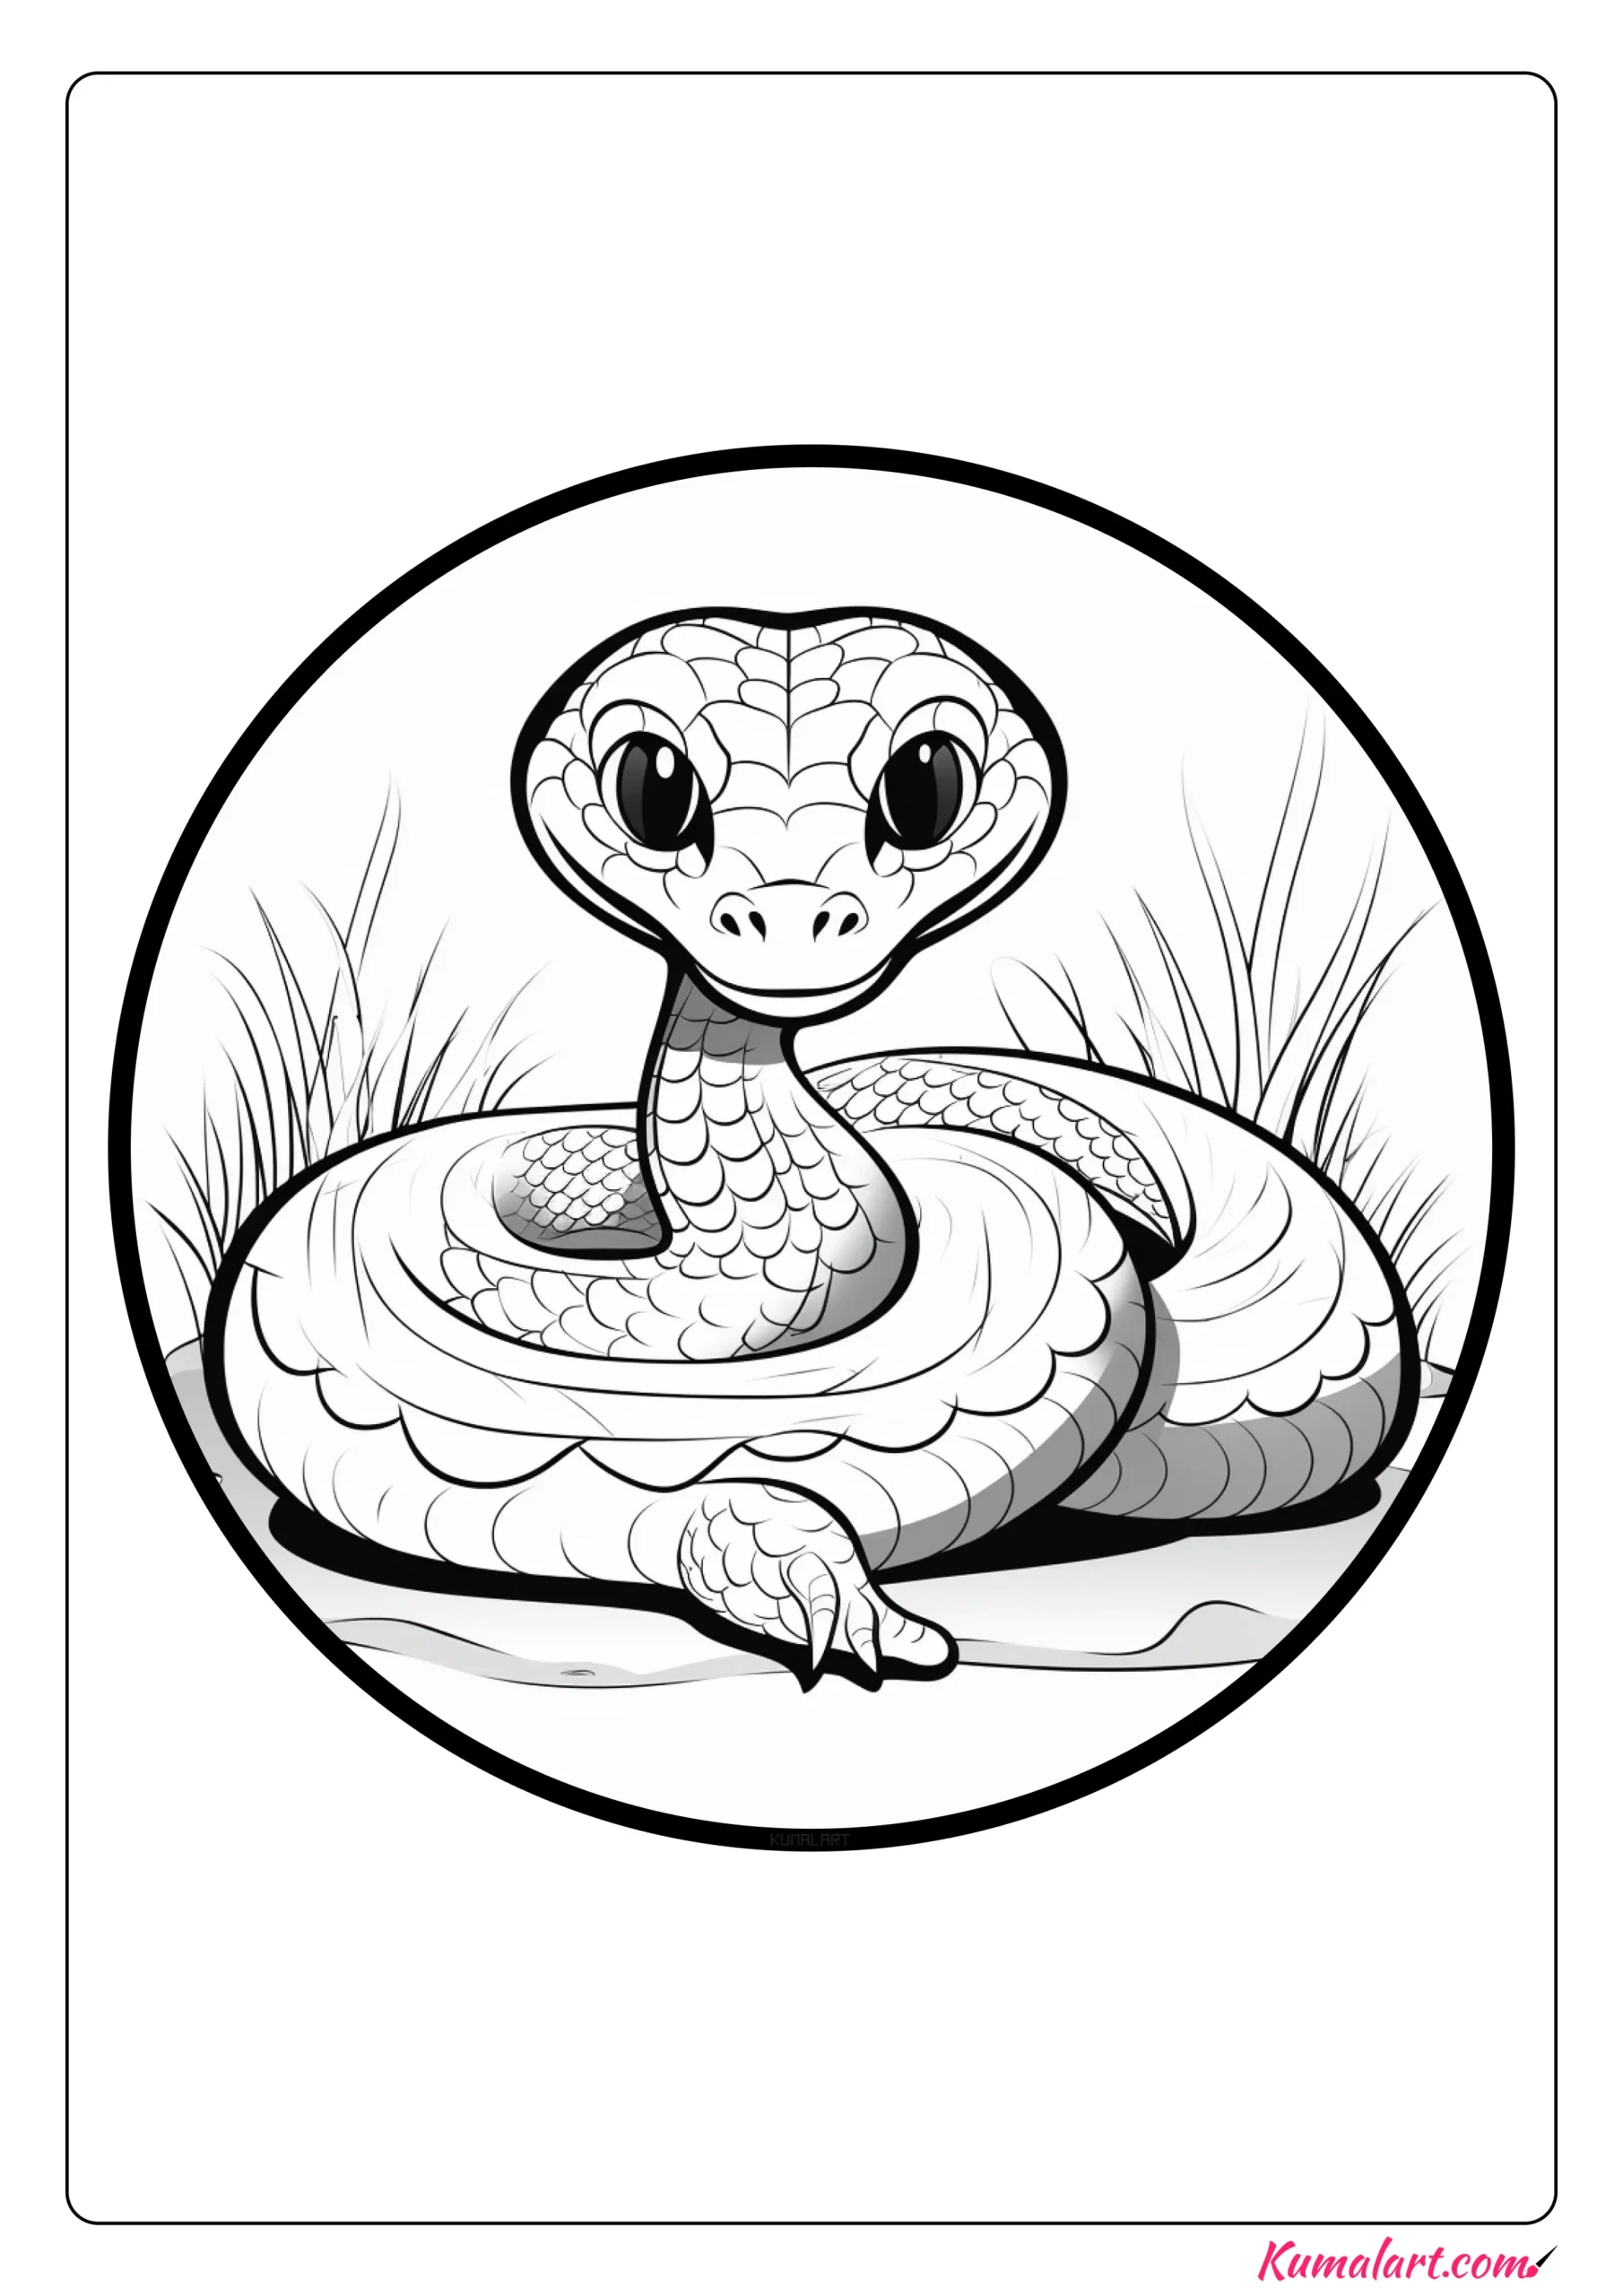 Twin Spotted Rattle Snake Coloring Page